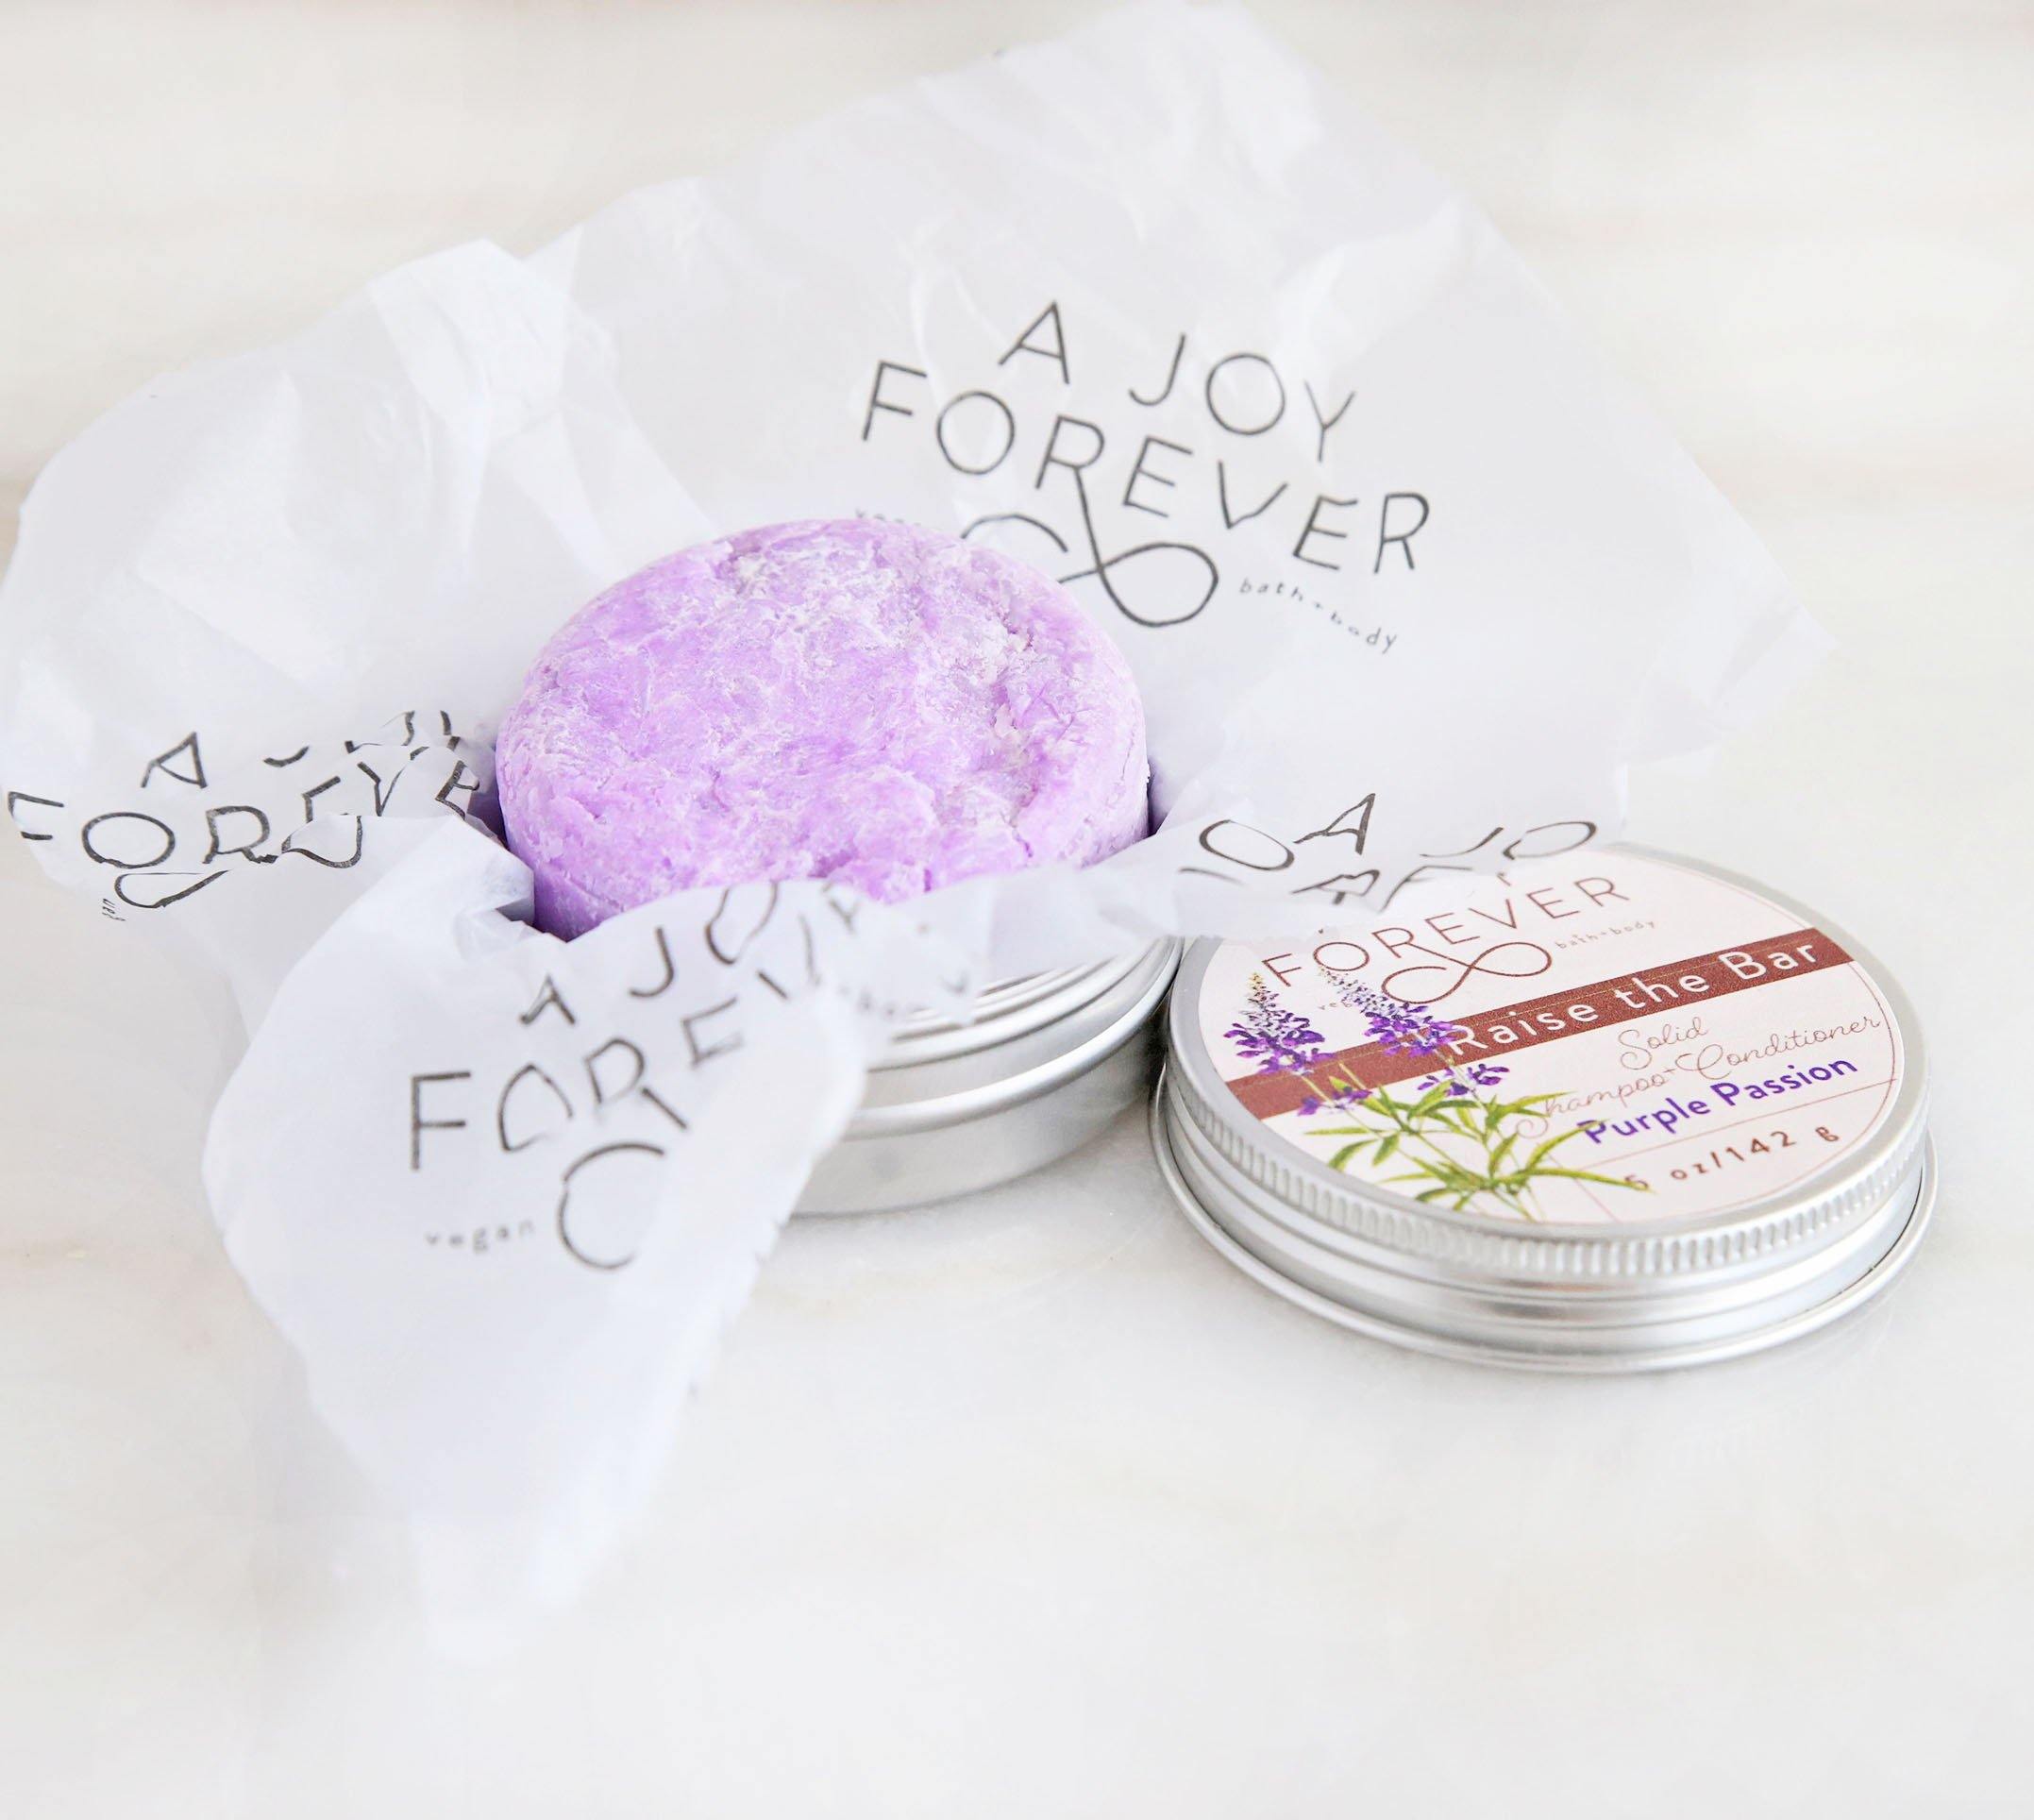 Solid Shampoo Bar + Conditioner Sets and Refills (NEW!) - A Joy Forever Bath + Body